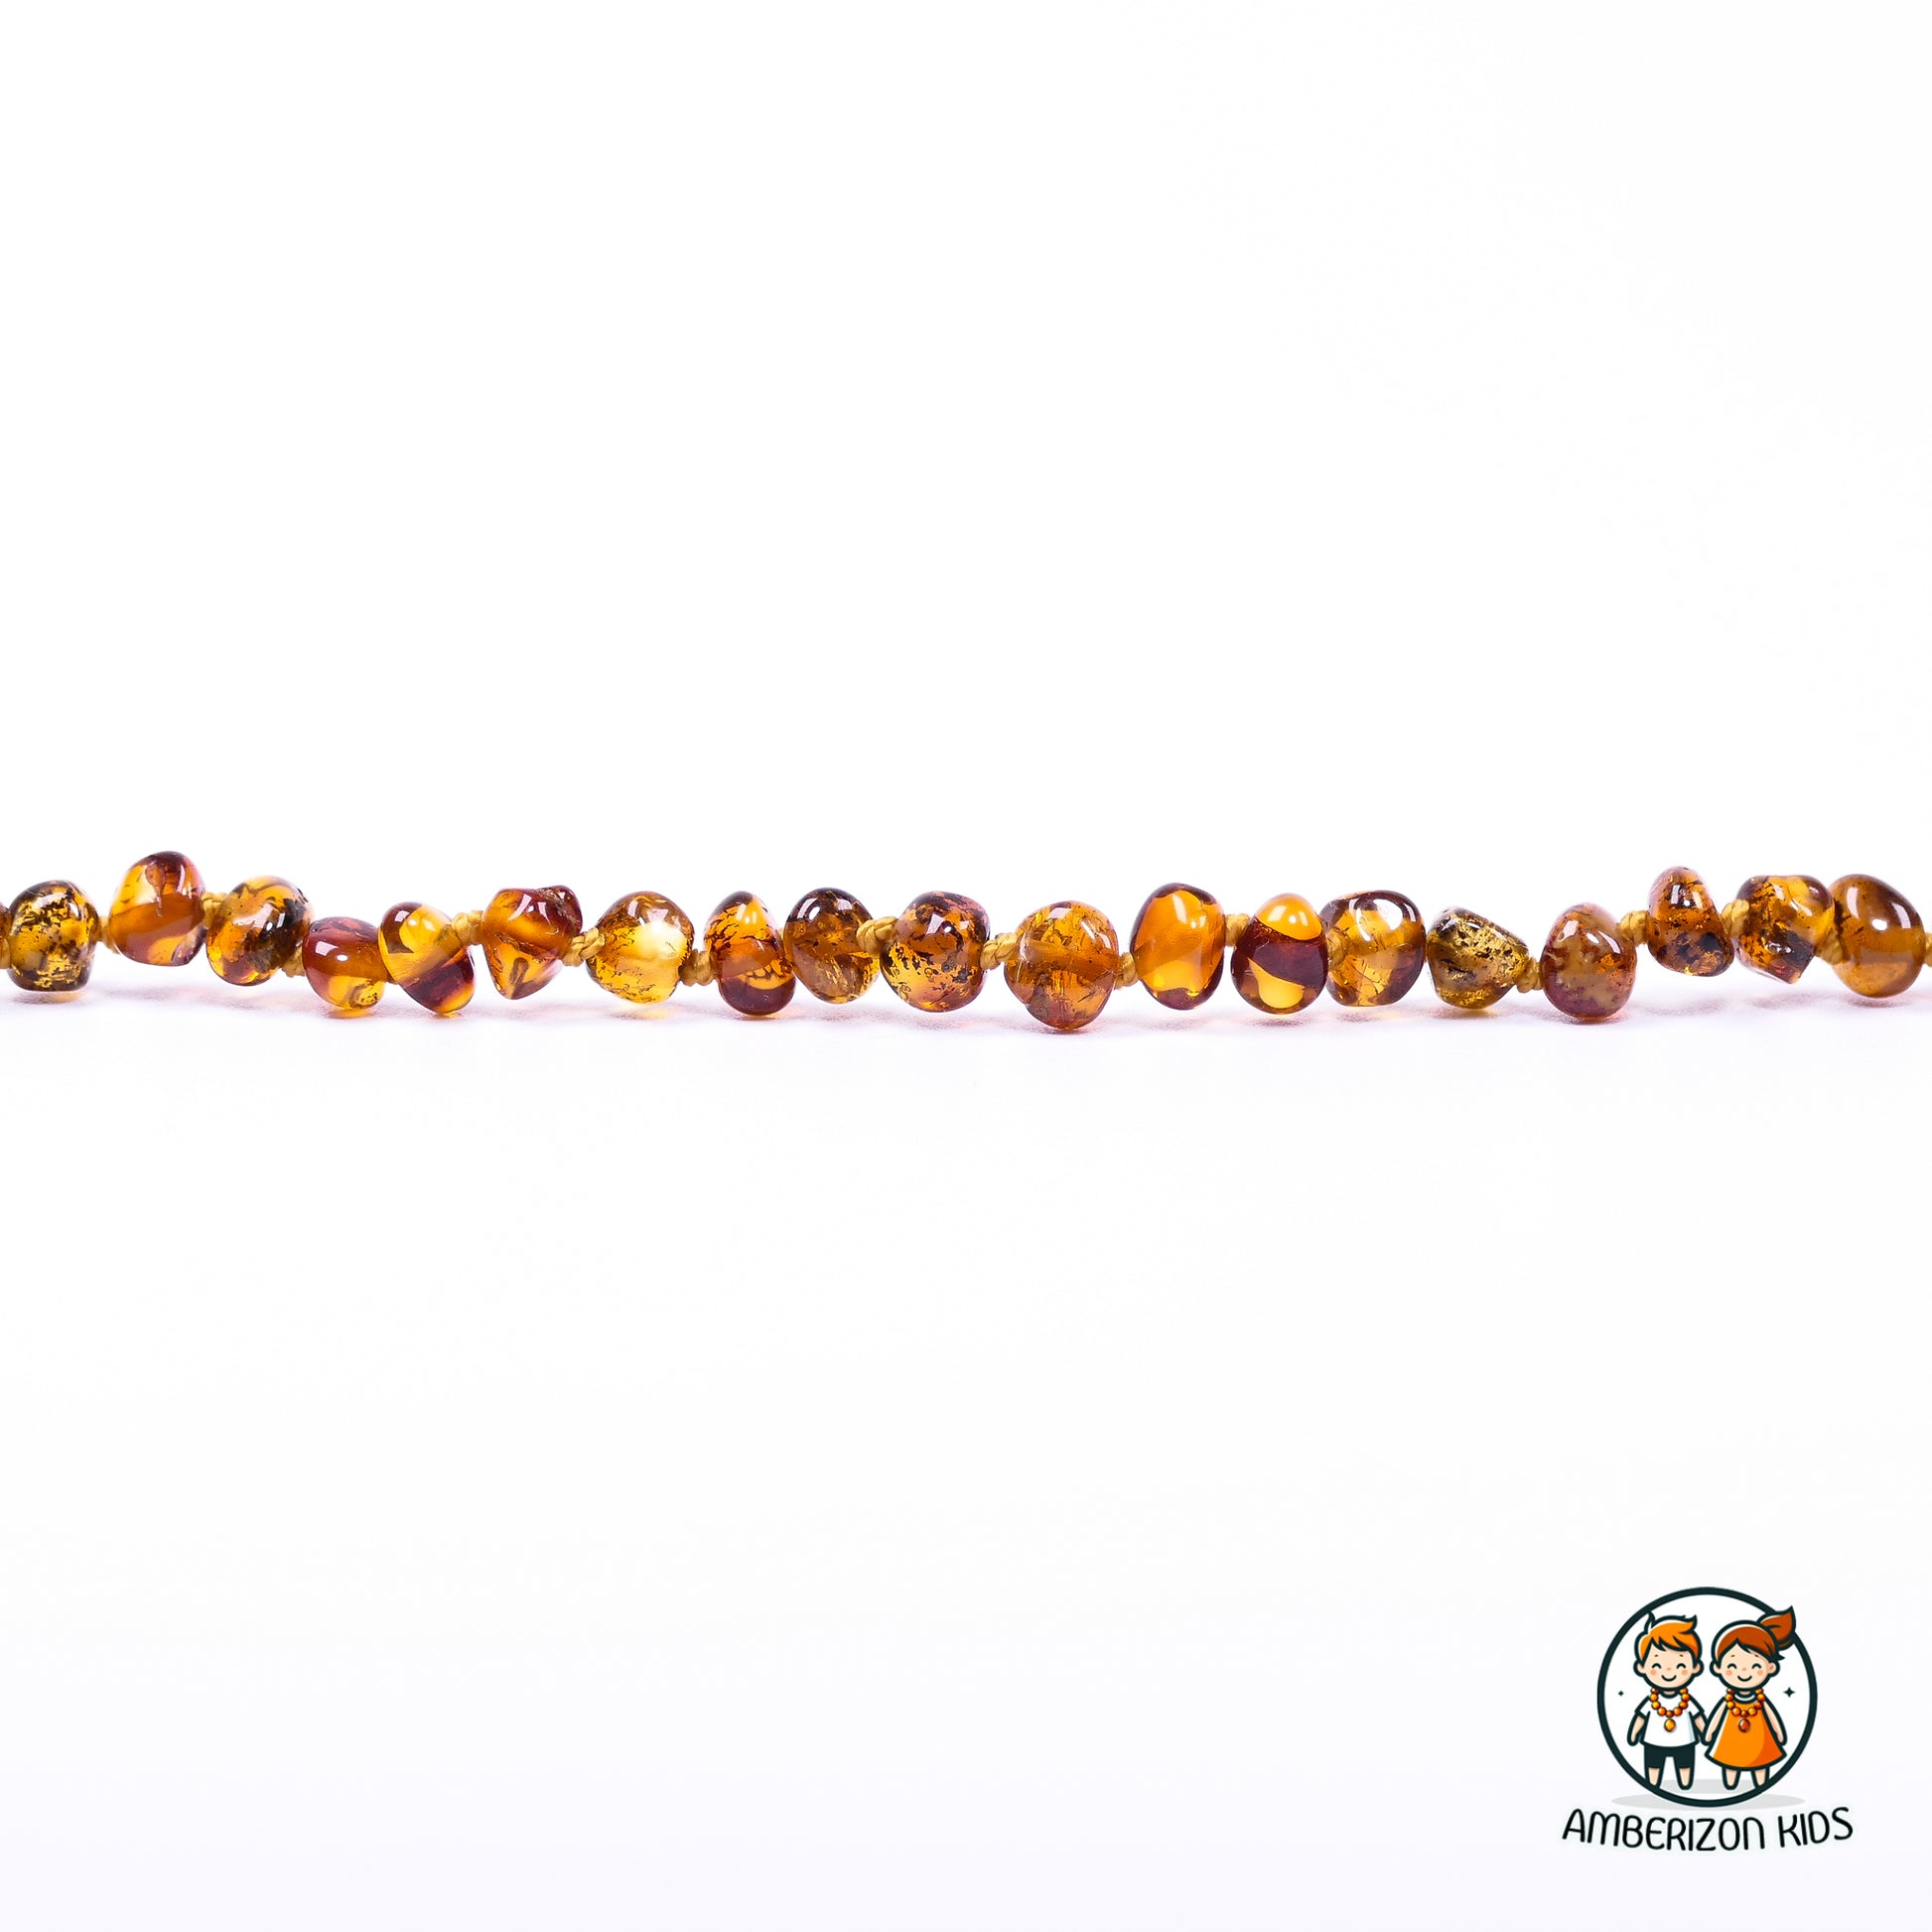 Genuine Amber Teething Aid for Children - Neutral Colors - Relaxing Cognac, Honey, and Green Beads